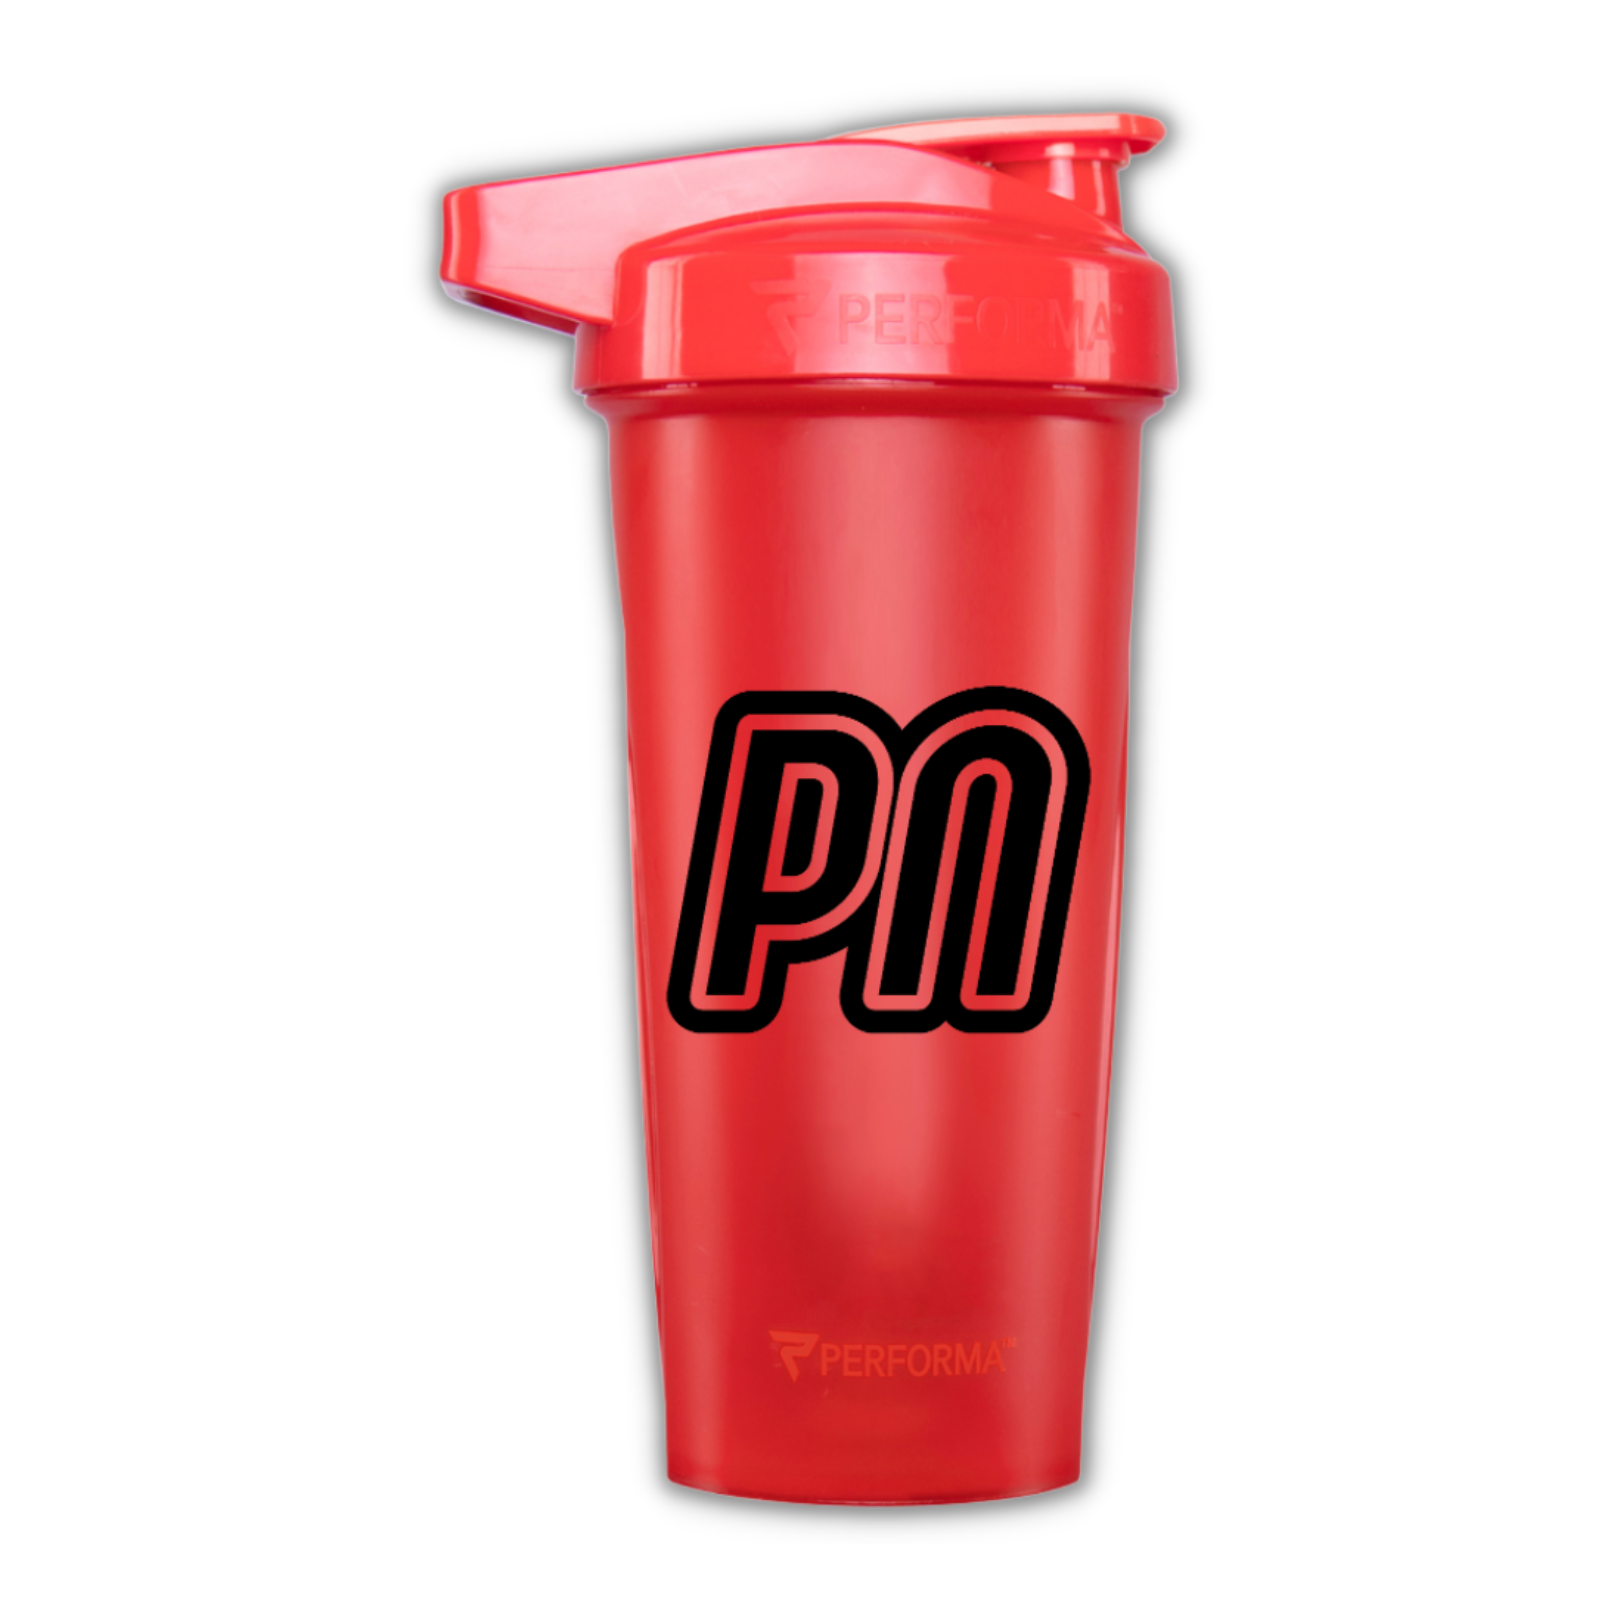 OUT OF STOCK / PRE-ORDER Shaker Bottle Red with Flat Cap 16